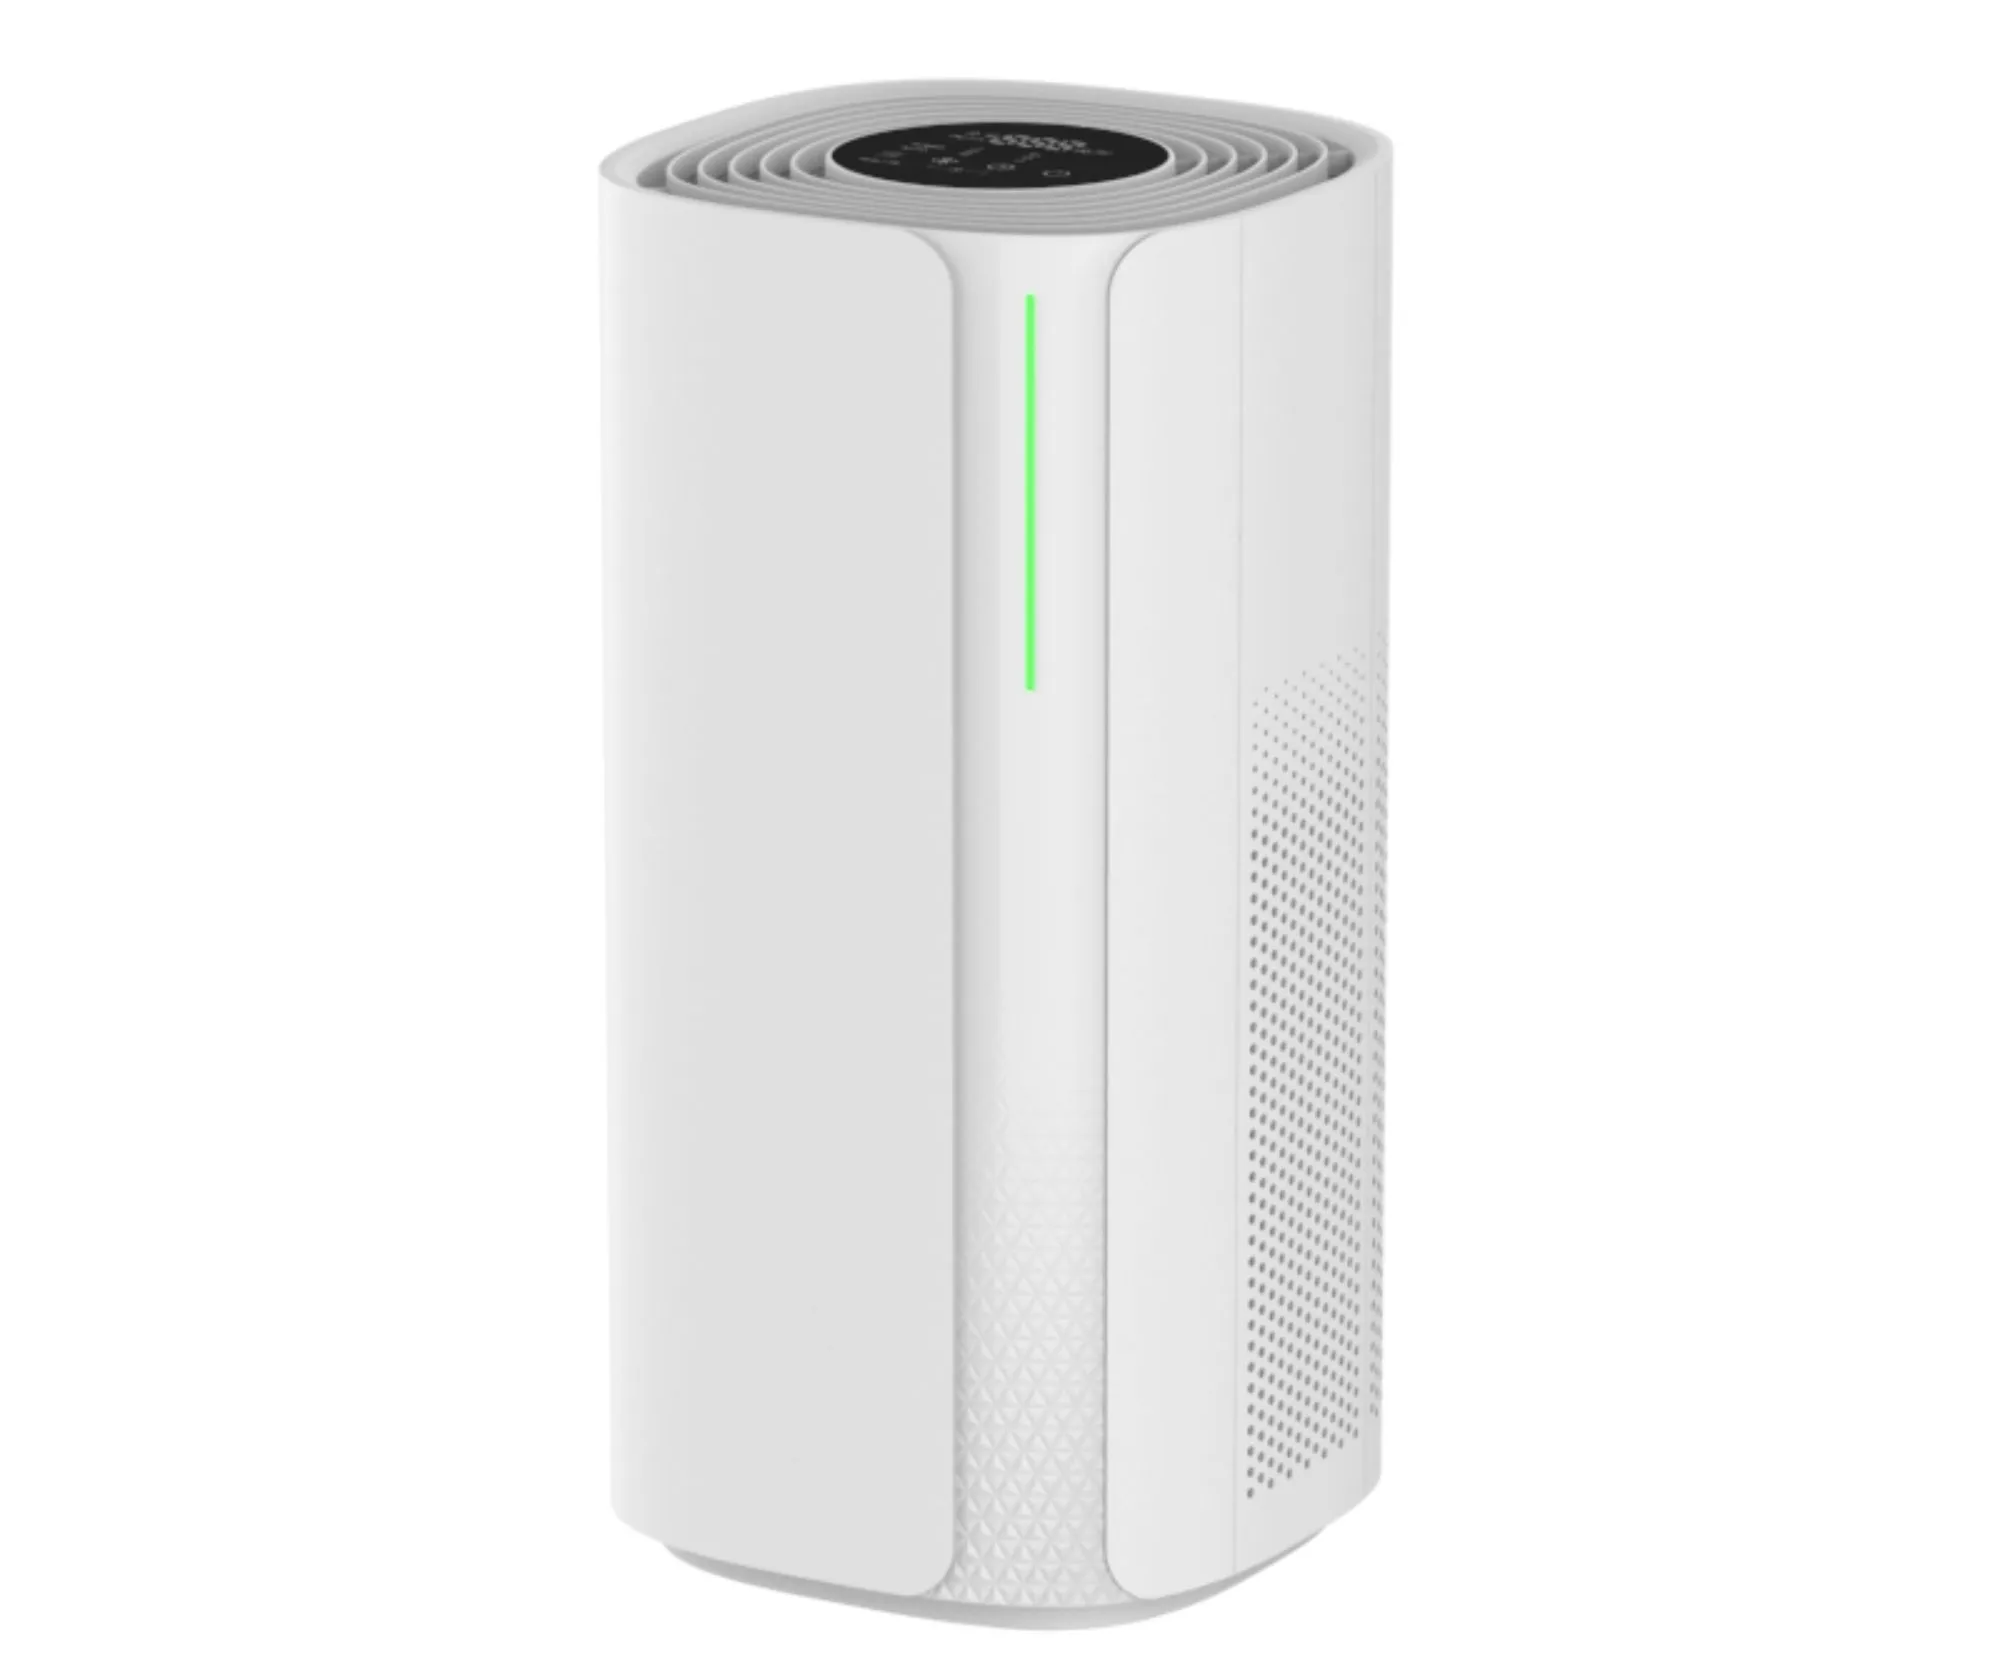 The Energy Efficiency of the JNUO Air Purifier